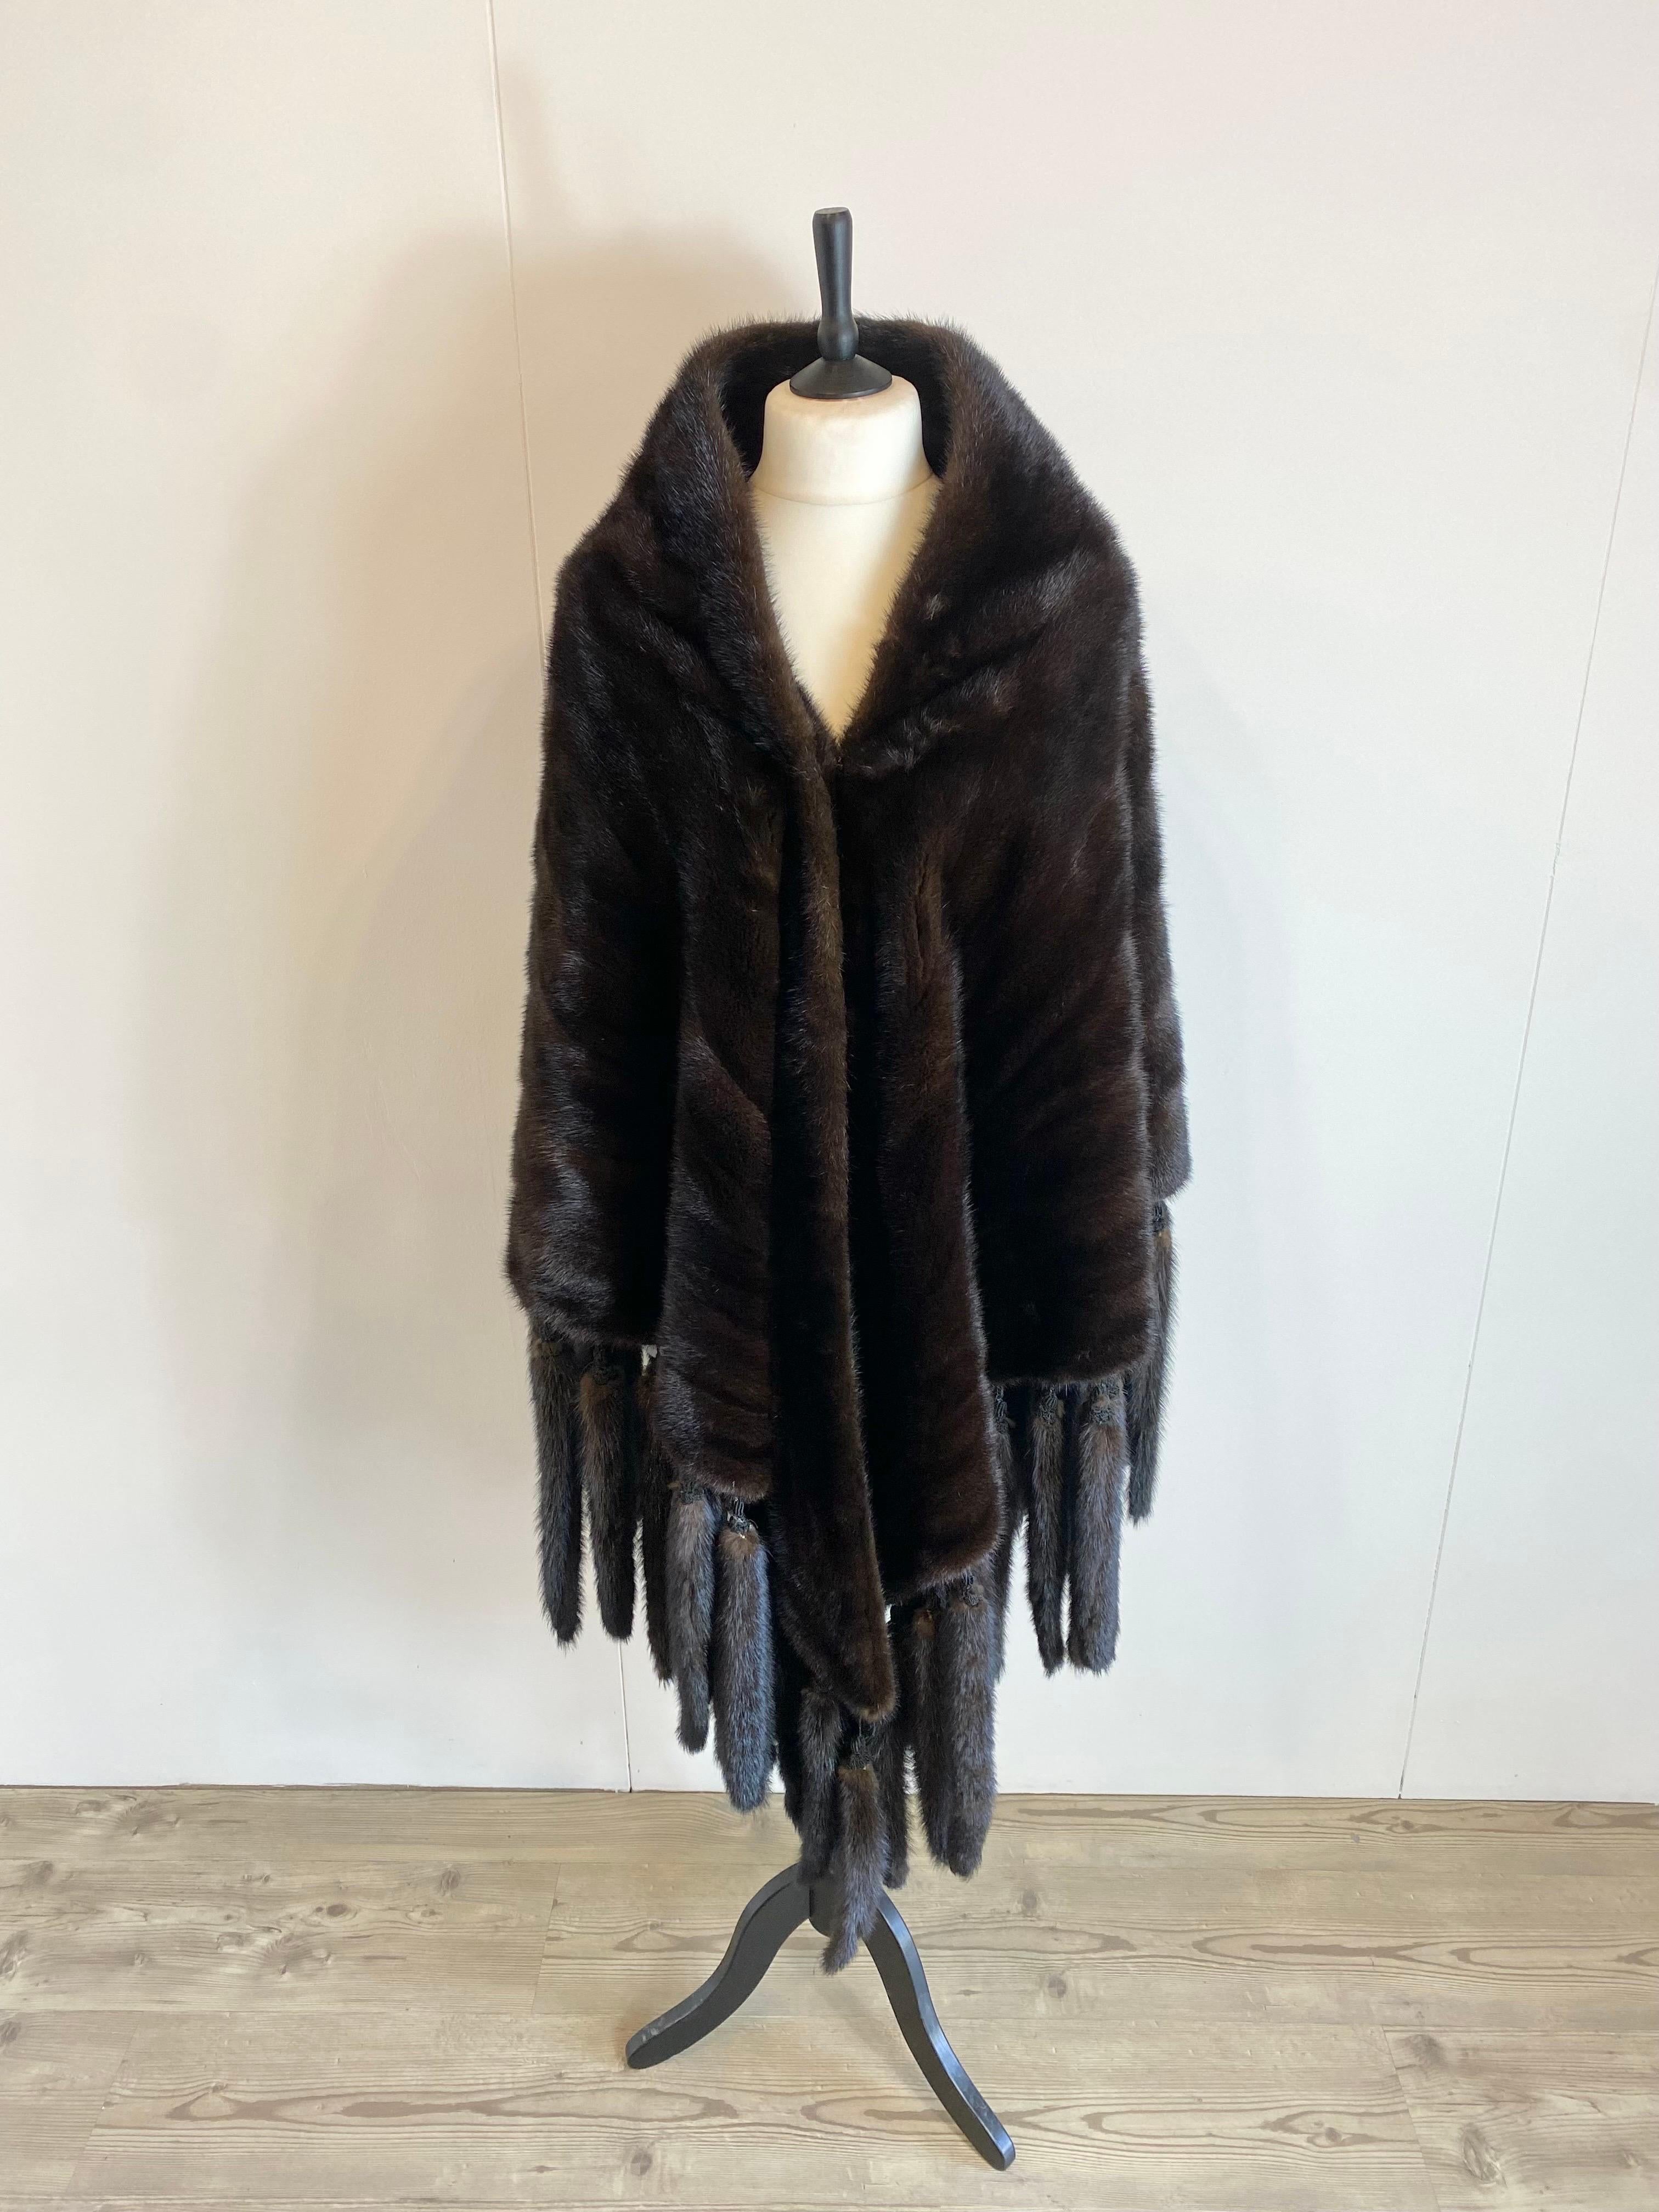 Fendi Alta Moda cape.
Vintage 80s garment.
In mink with mink tails and branded silk lining.
It does not have a size label but fits an international S/M.
Maximum length counting the tails 140 cm.
Second hand item but in excellent general condition,